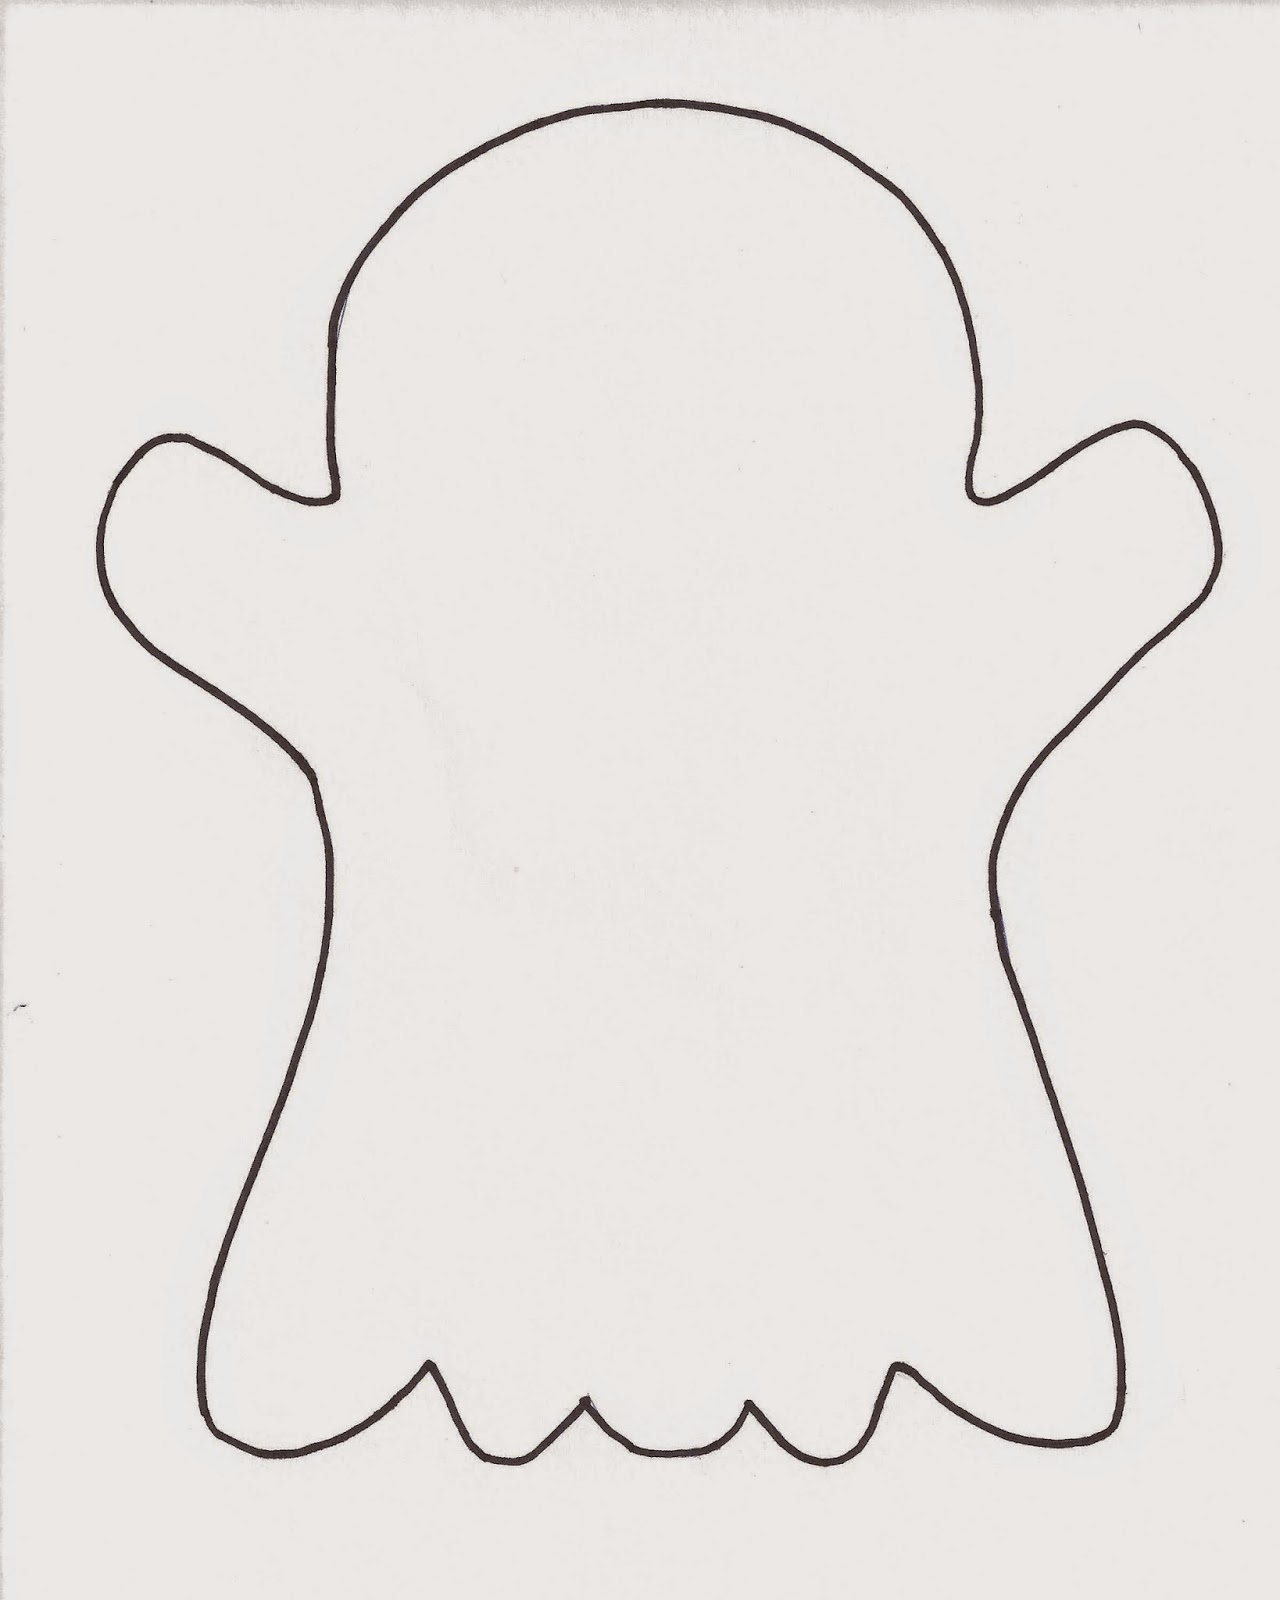 Crafts for Kids' Minds: Free Printable Ghost Template